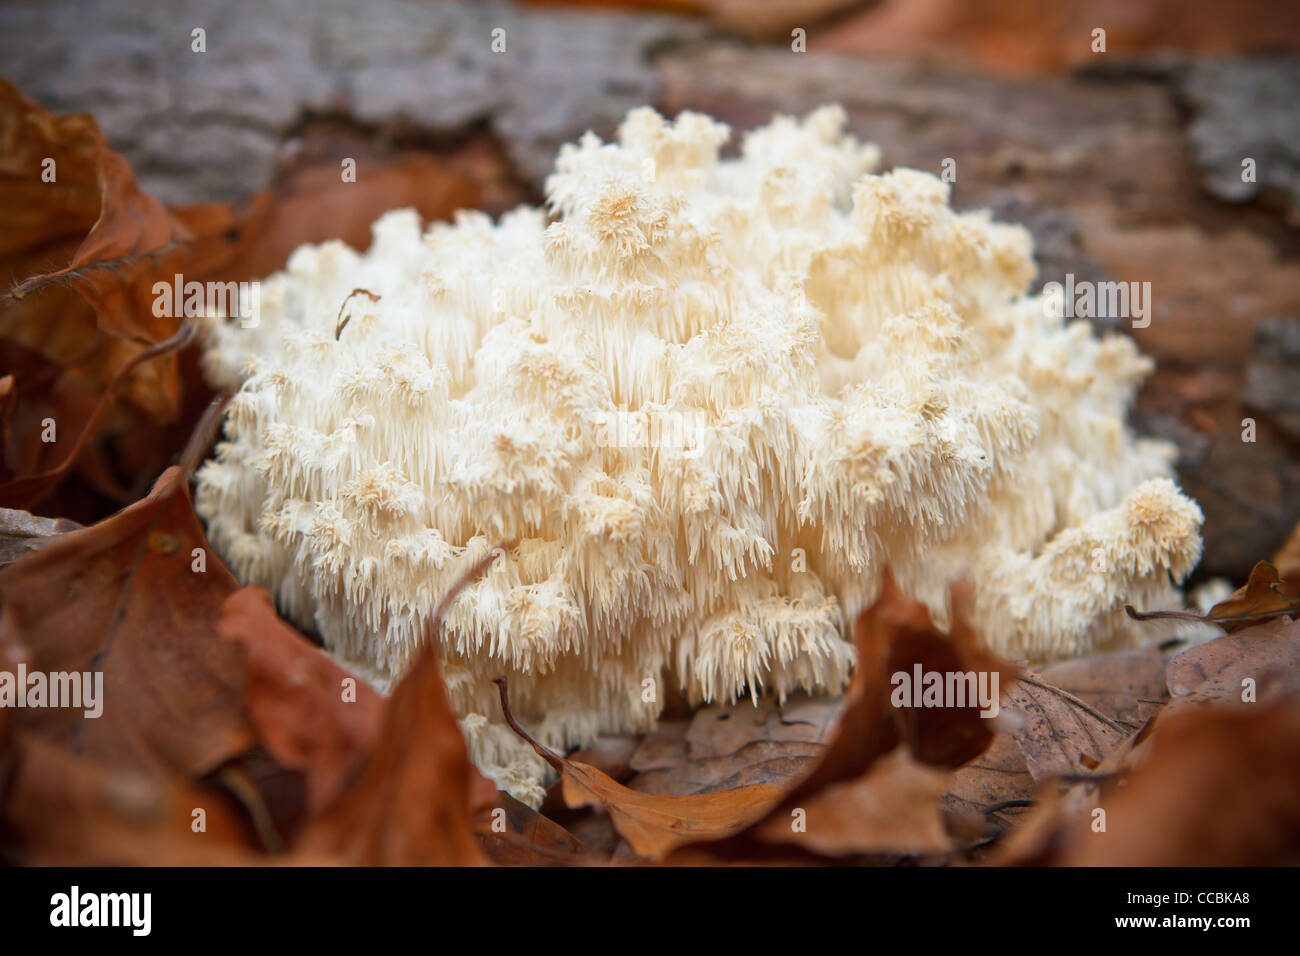 Coral tooth (Hericium coralloides, Hericium clathroides) on dead wood. Stock Photo